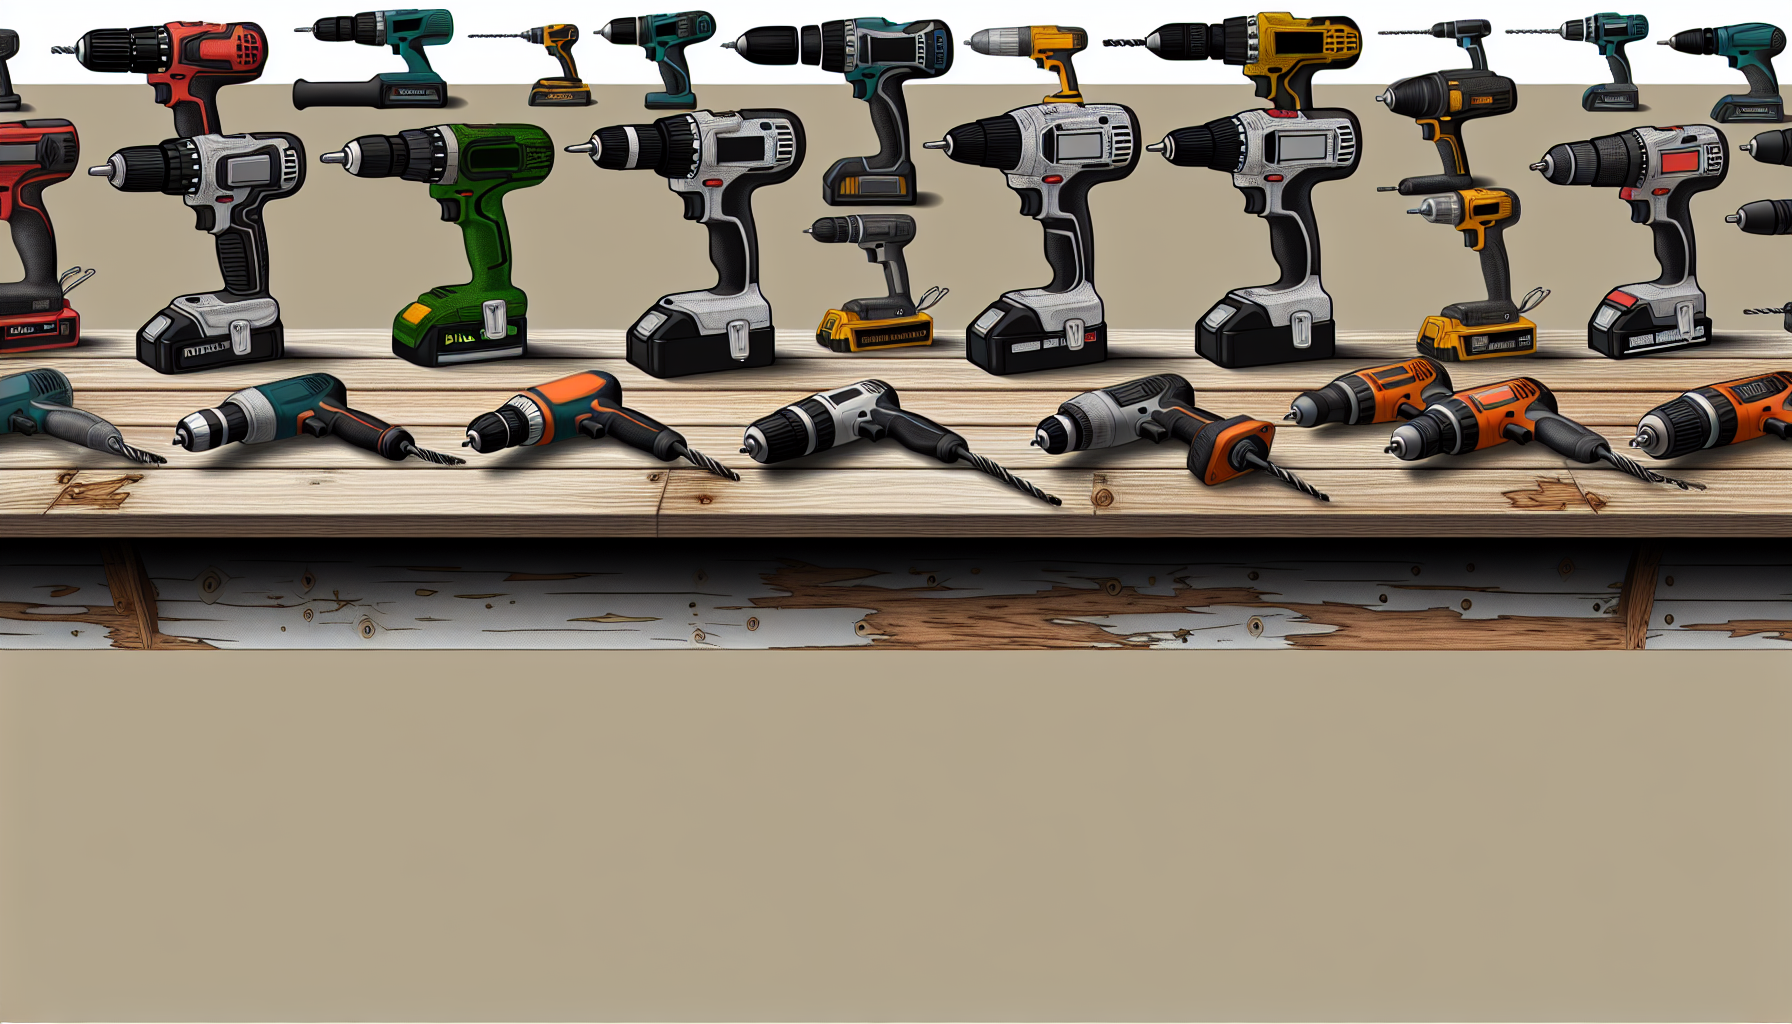 A variety of power drills including impact drivers